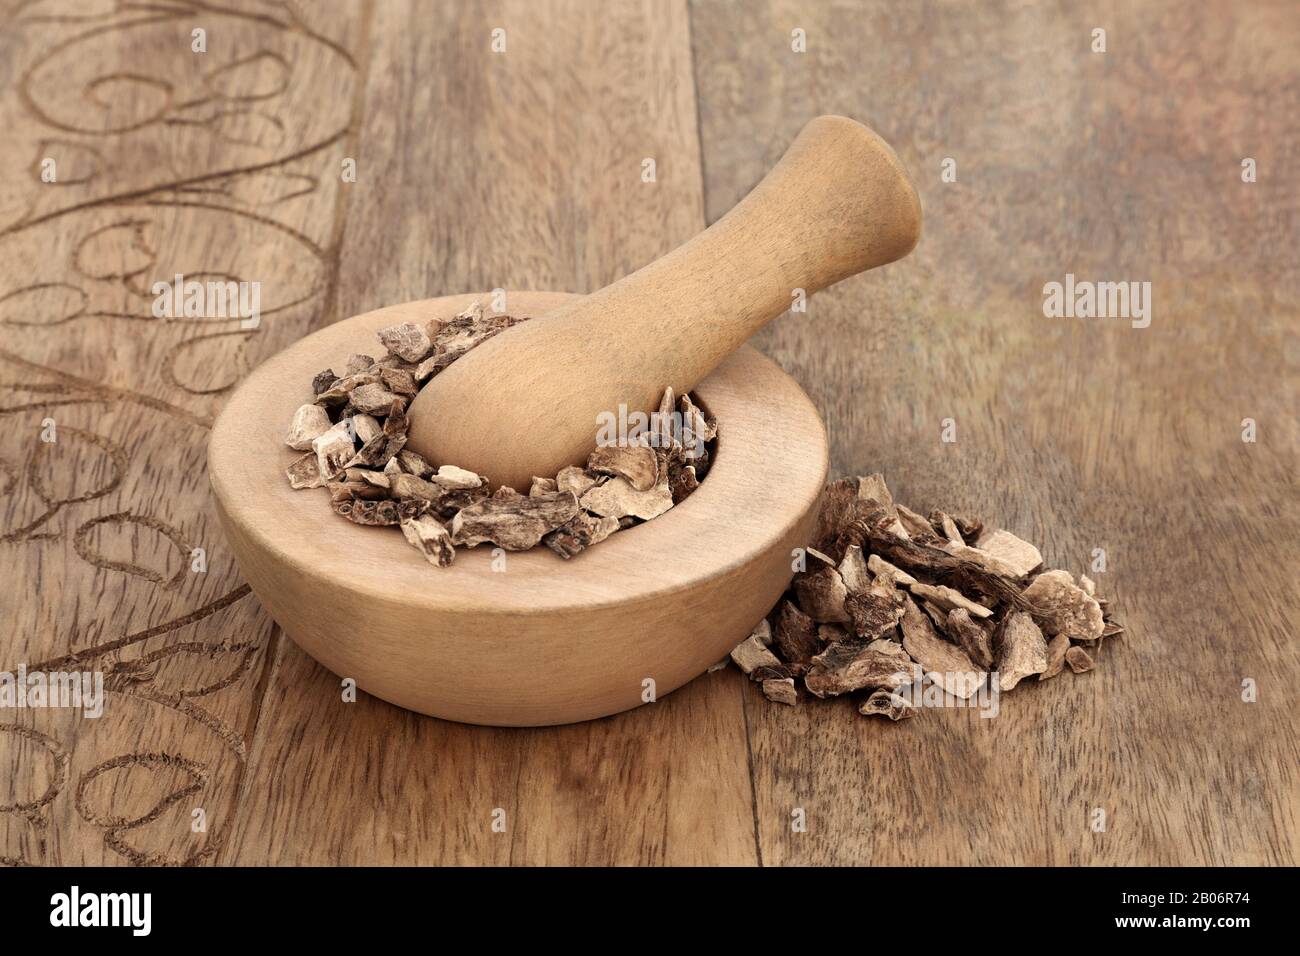 Calamus herb root in a mortar with pestle used in herbal medicine to treat ulcers, upset stomach and inflammation, diarrhoea & flatulence. Stock Photo